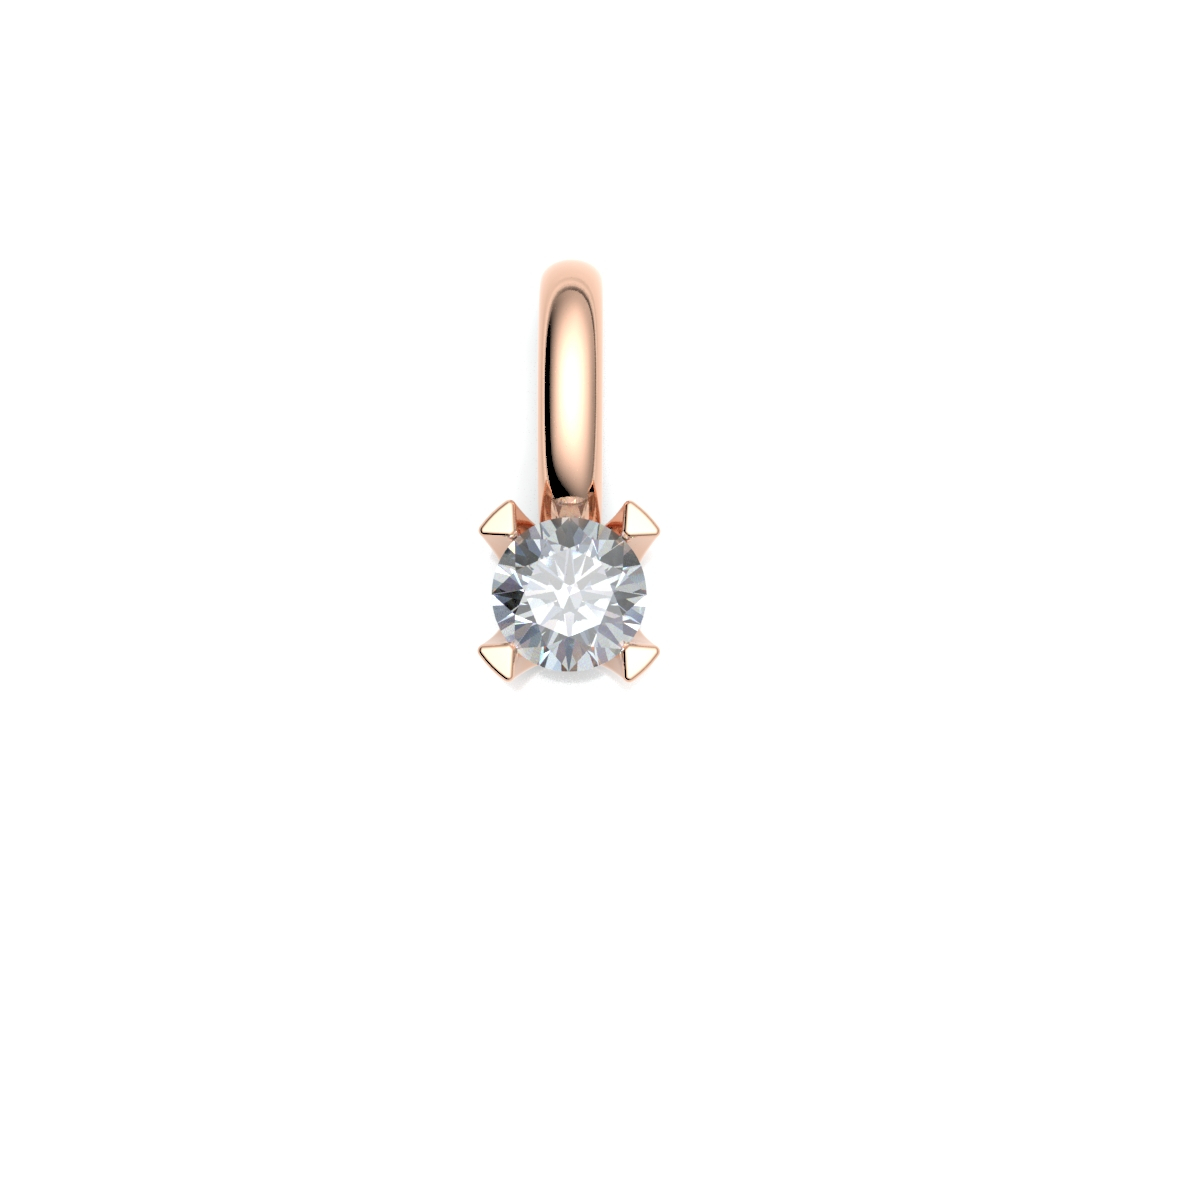 212798-4034-001 | Anhänger Heinsberg 212798 375 Rotgold<br> Brillant 0,150 ct H-SI ∅ 3.4mm<br>100% Made in Germany  